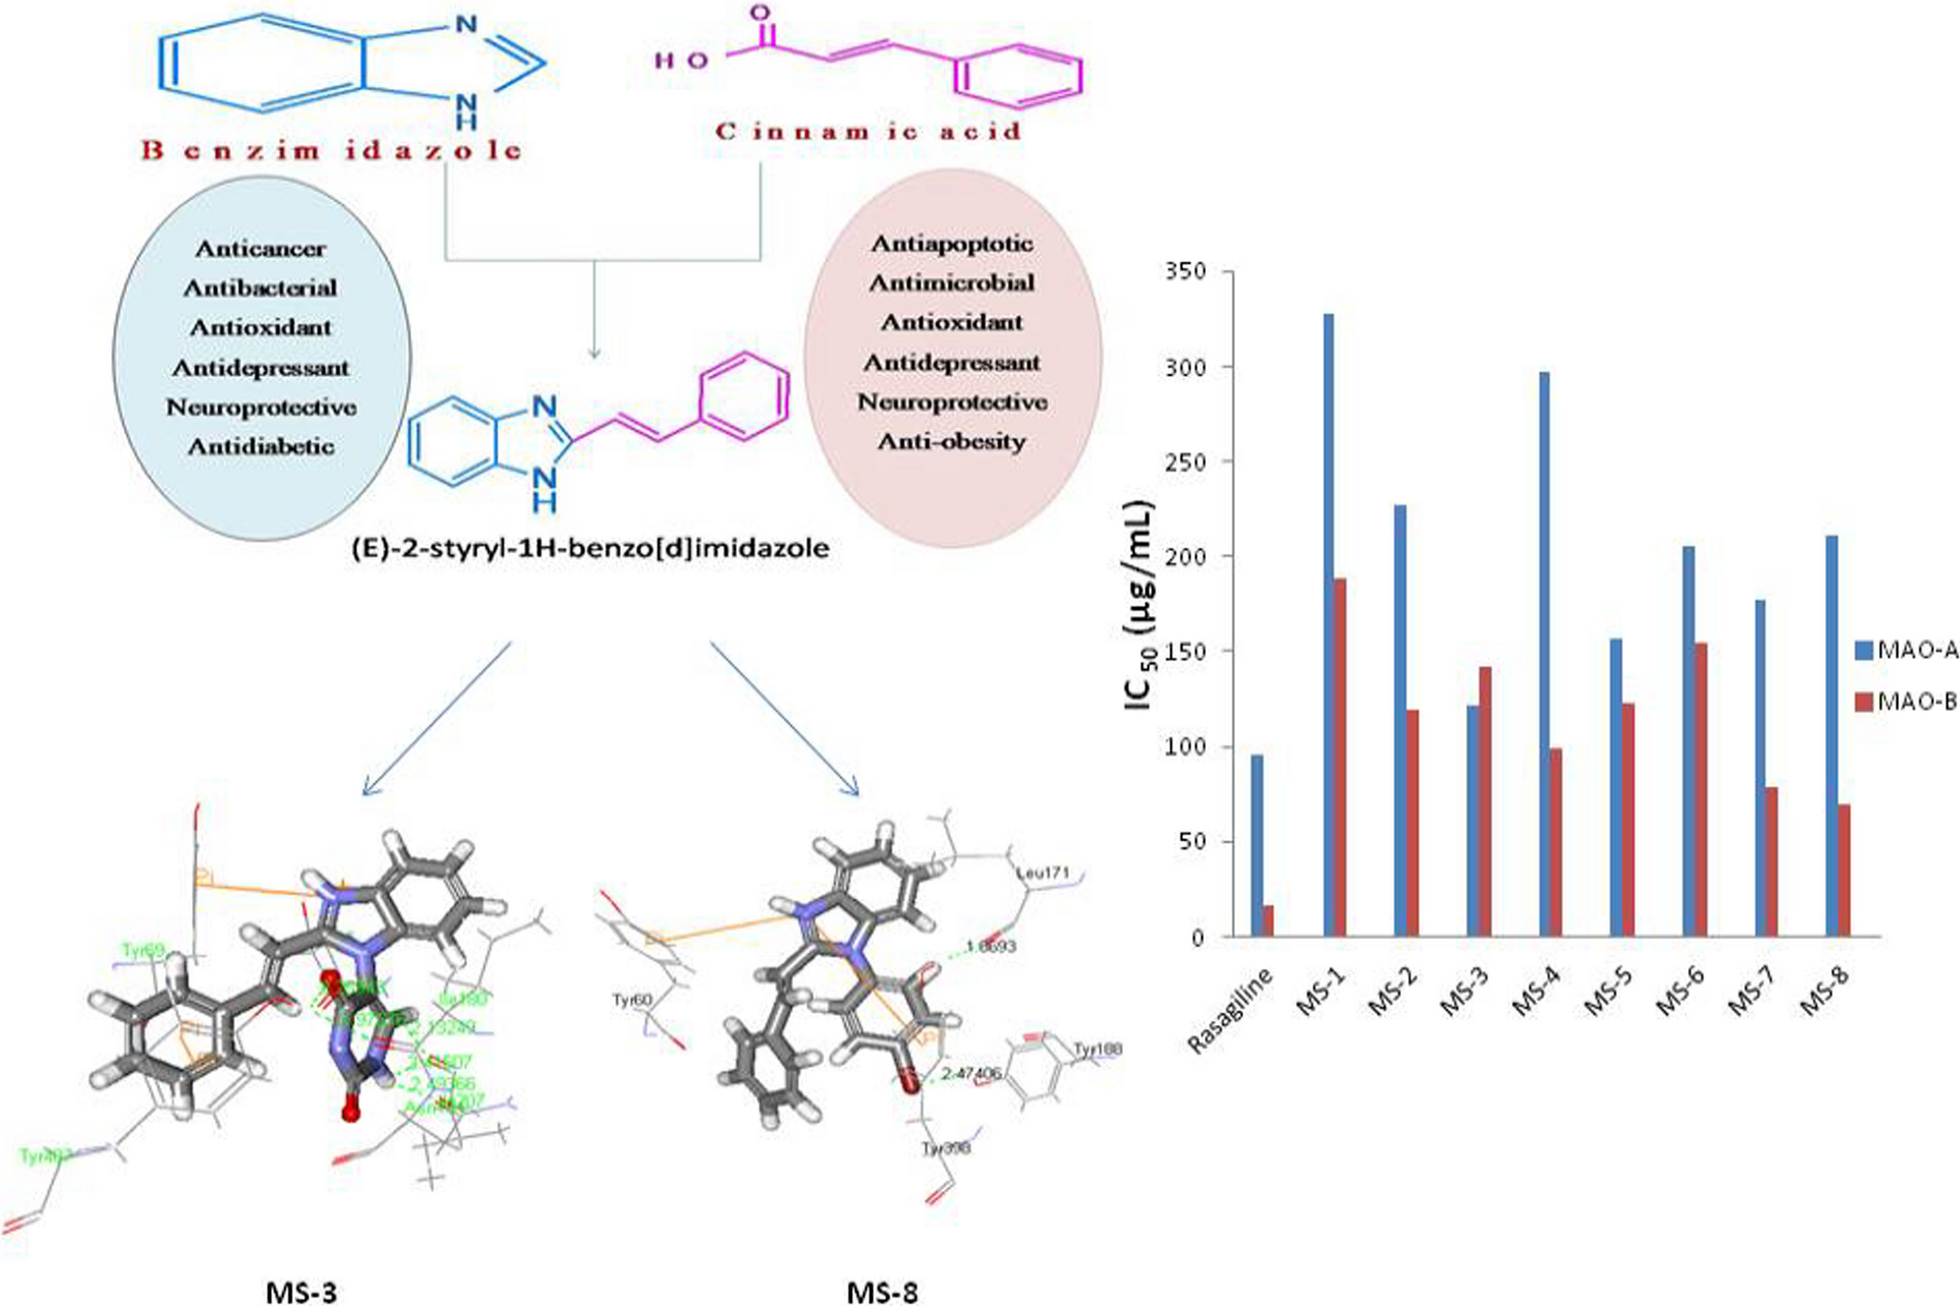 Design, synthesis and in-vitro anti-depressant activity evaluation of some 2-styrylbenzimidazole derivatives